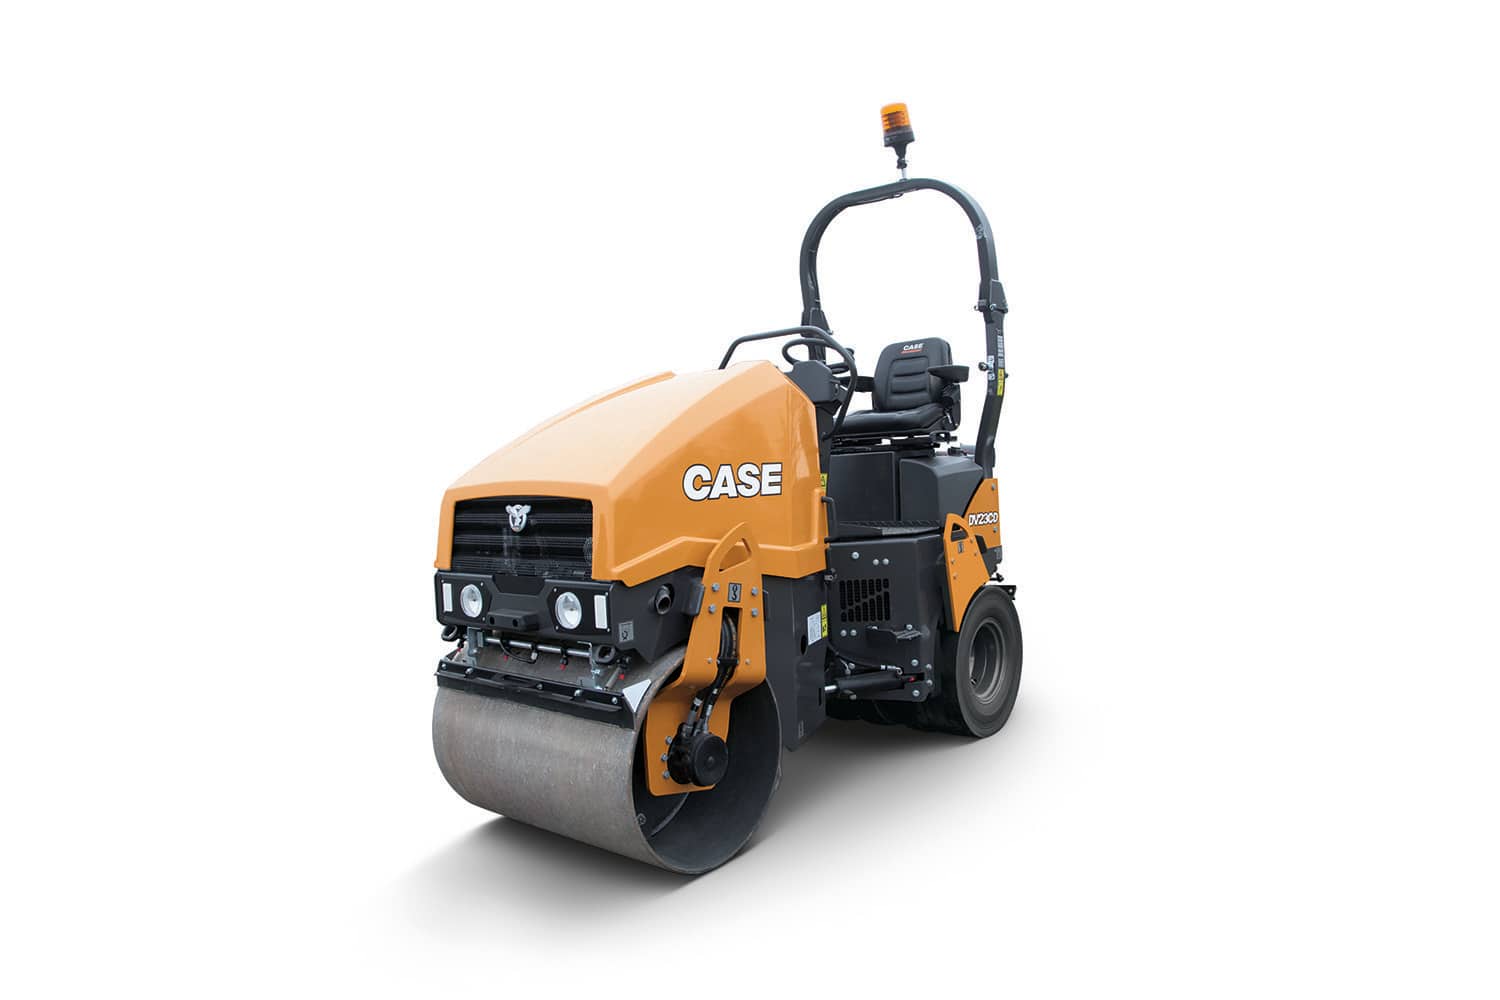 https://assets.cnhindustrial.com/casece/nafta/assets/Products/Compaction-Equipment/Double-Drum-Rollers/DV23CD/CASE-DV23CD-1.jpg?Width=800&Height=450